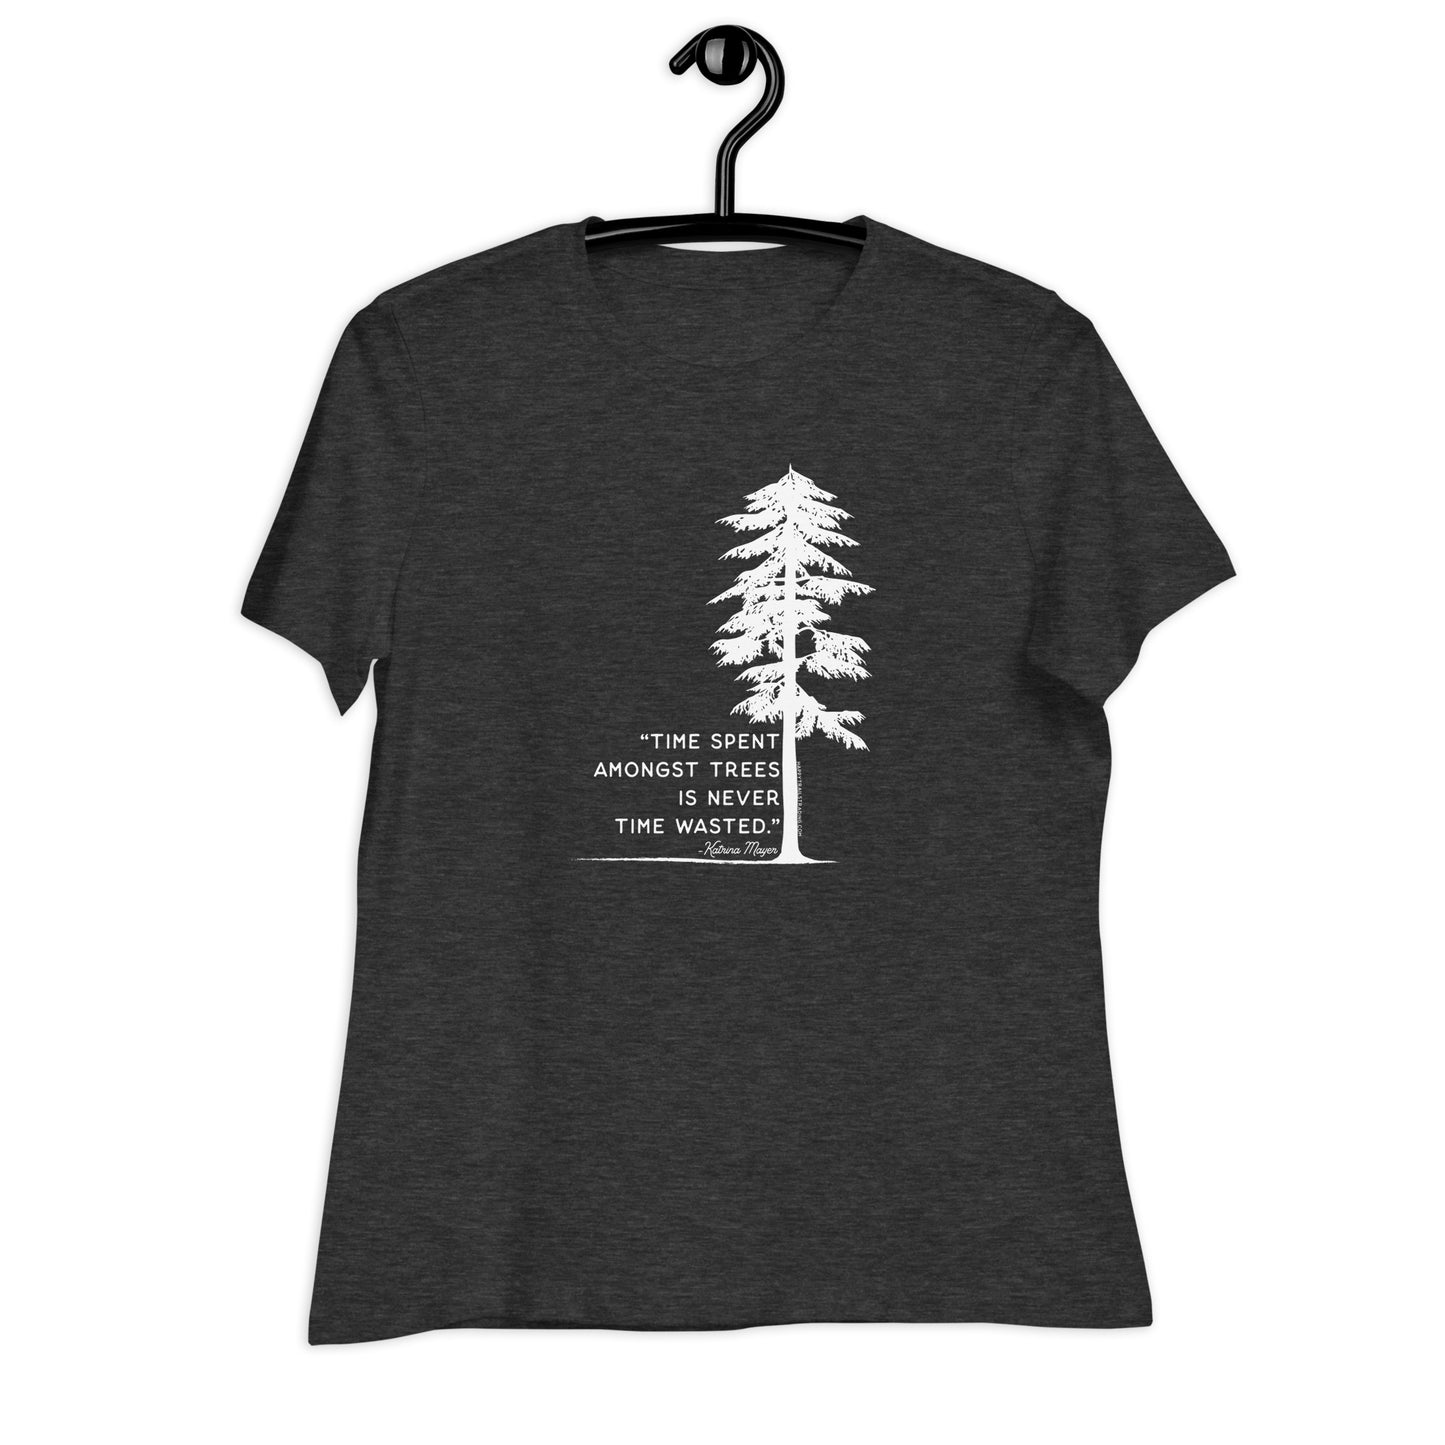 Amongst The Trees - Women's Relaxed T-Shirt